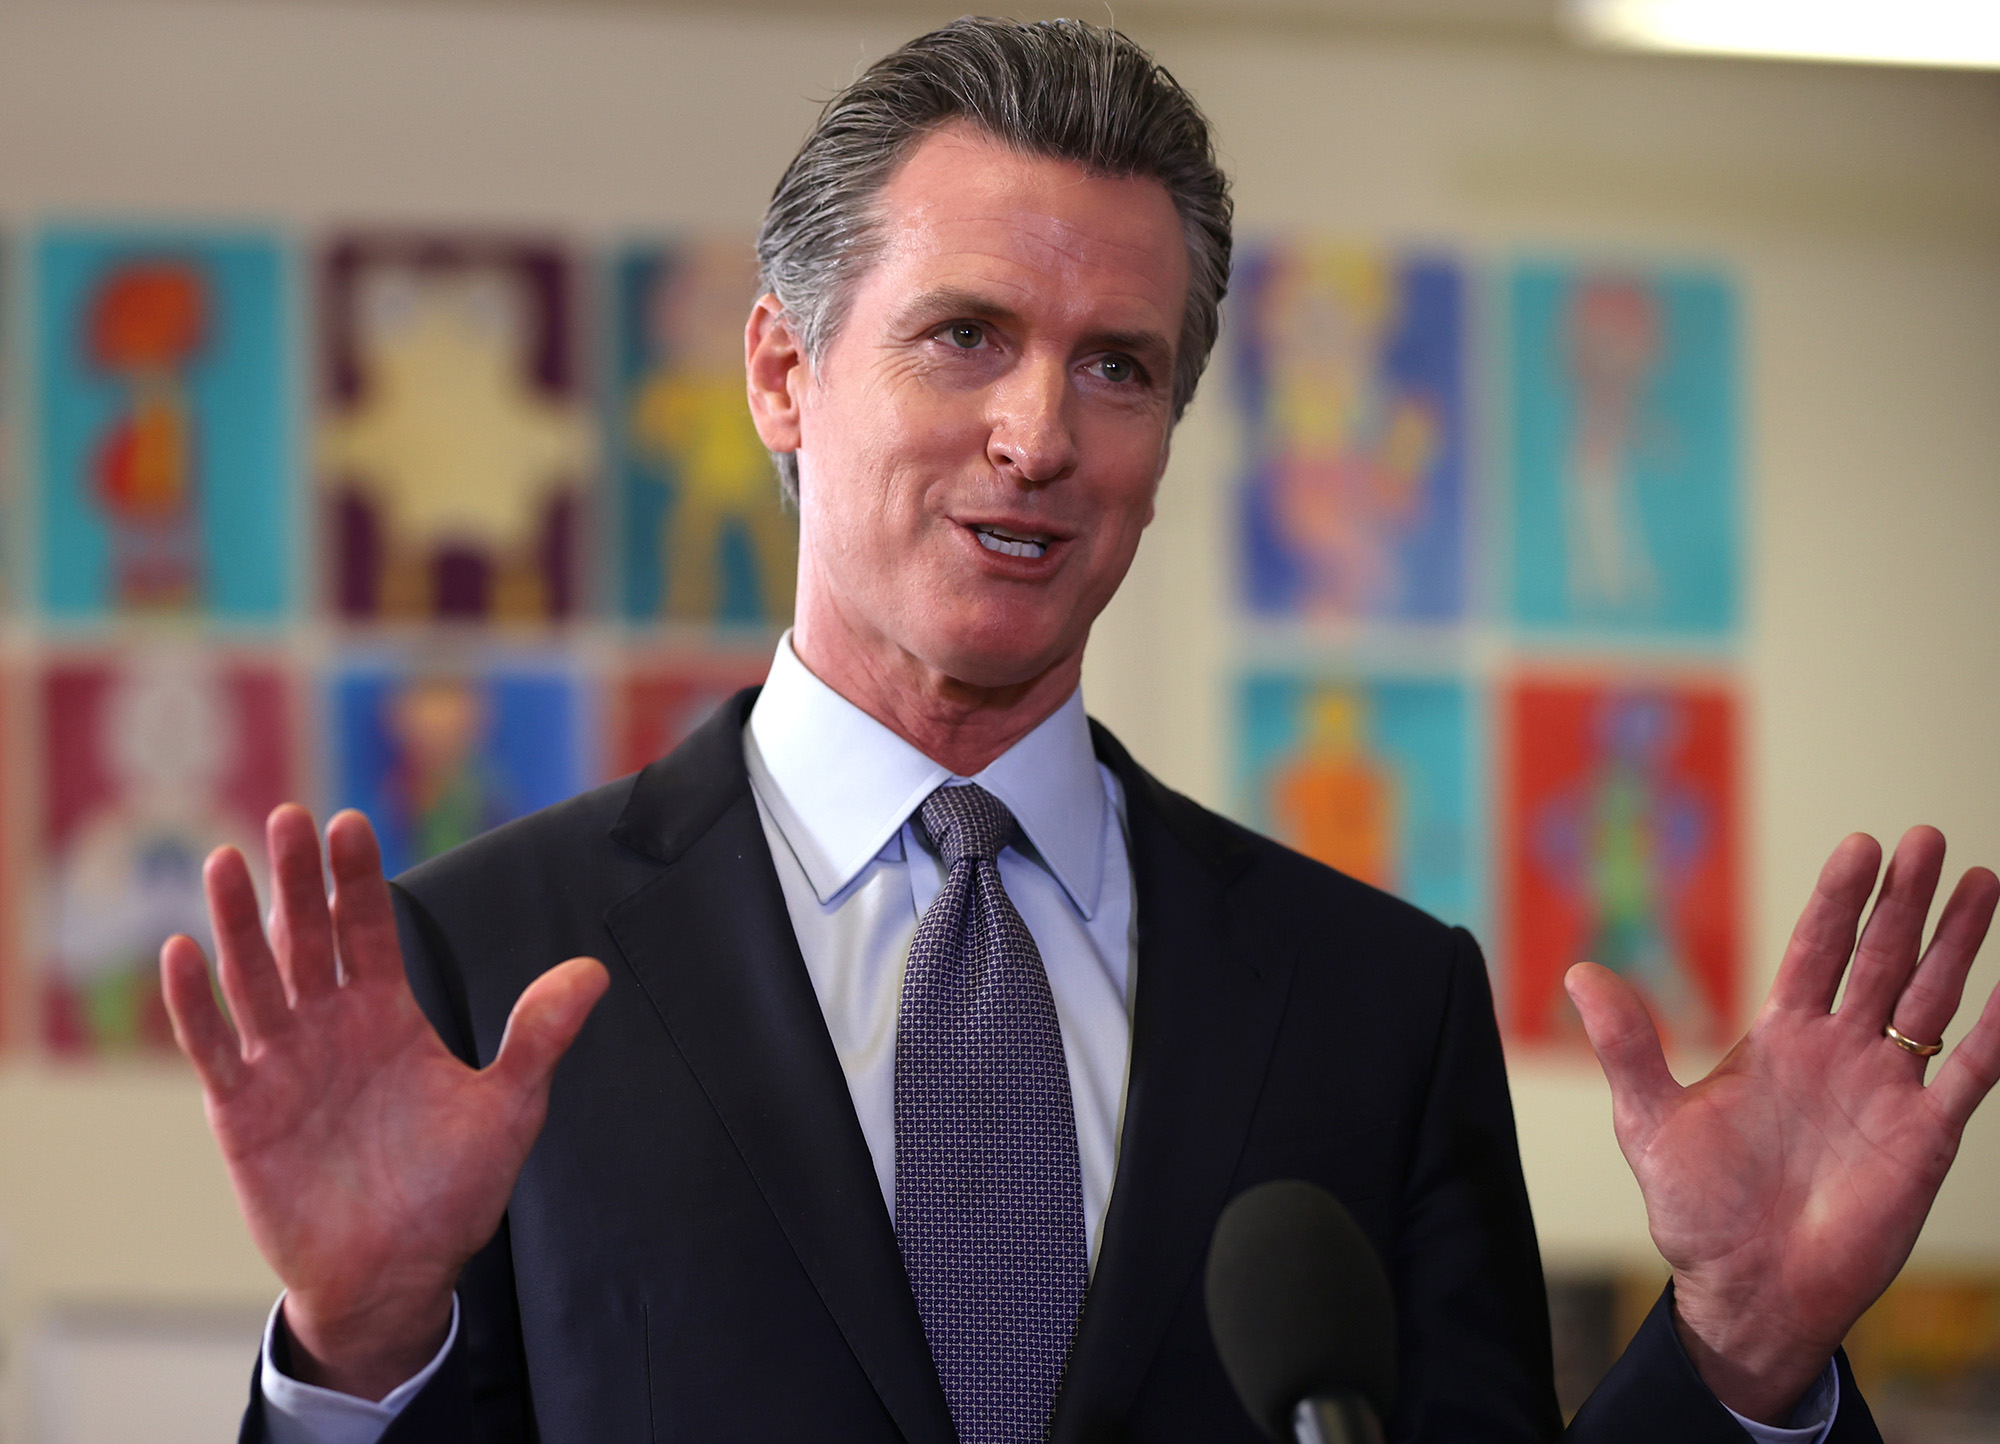 California Gov. Gavn Newsom’s mandate requires all eligible public school students to be vaccinated to attend in-person classes